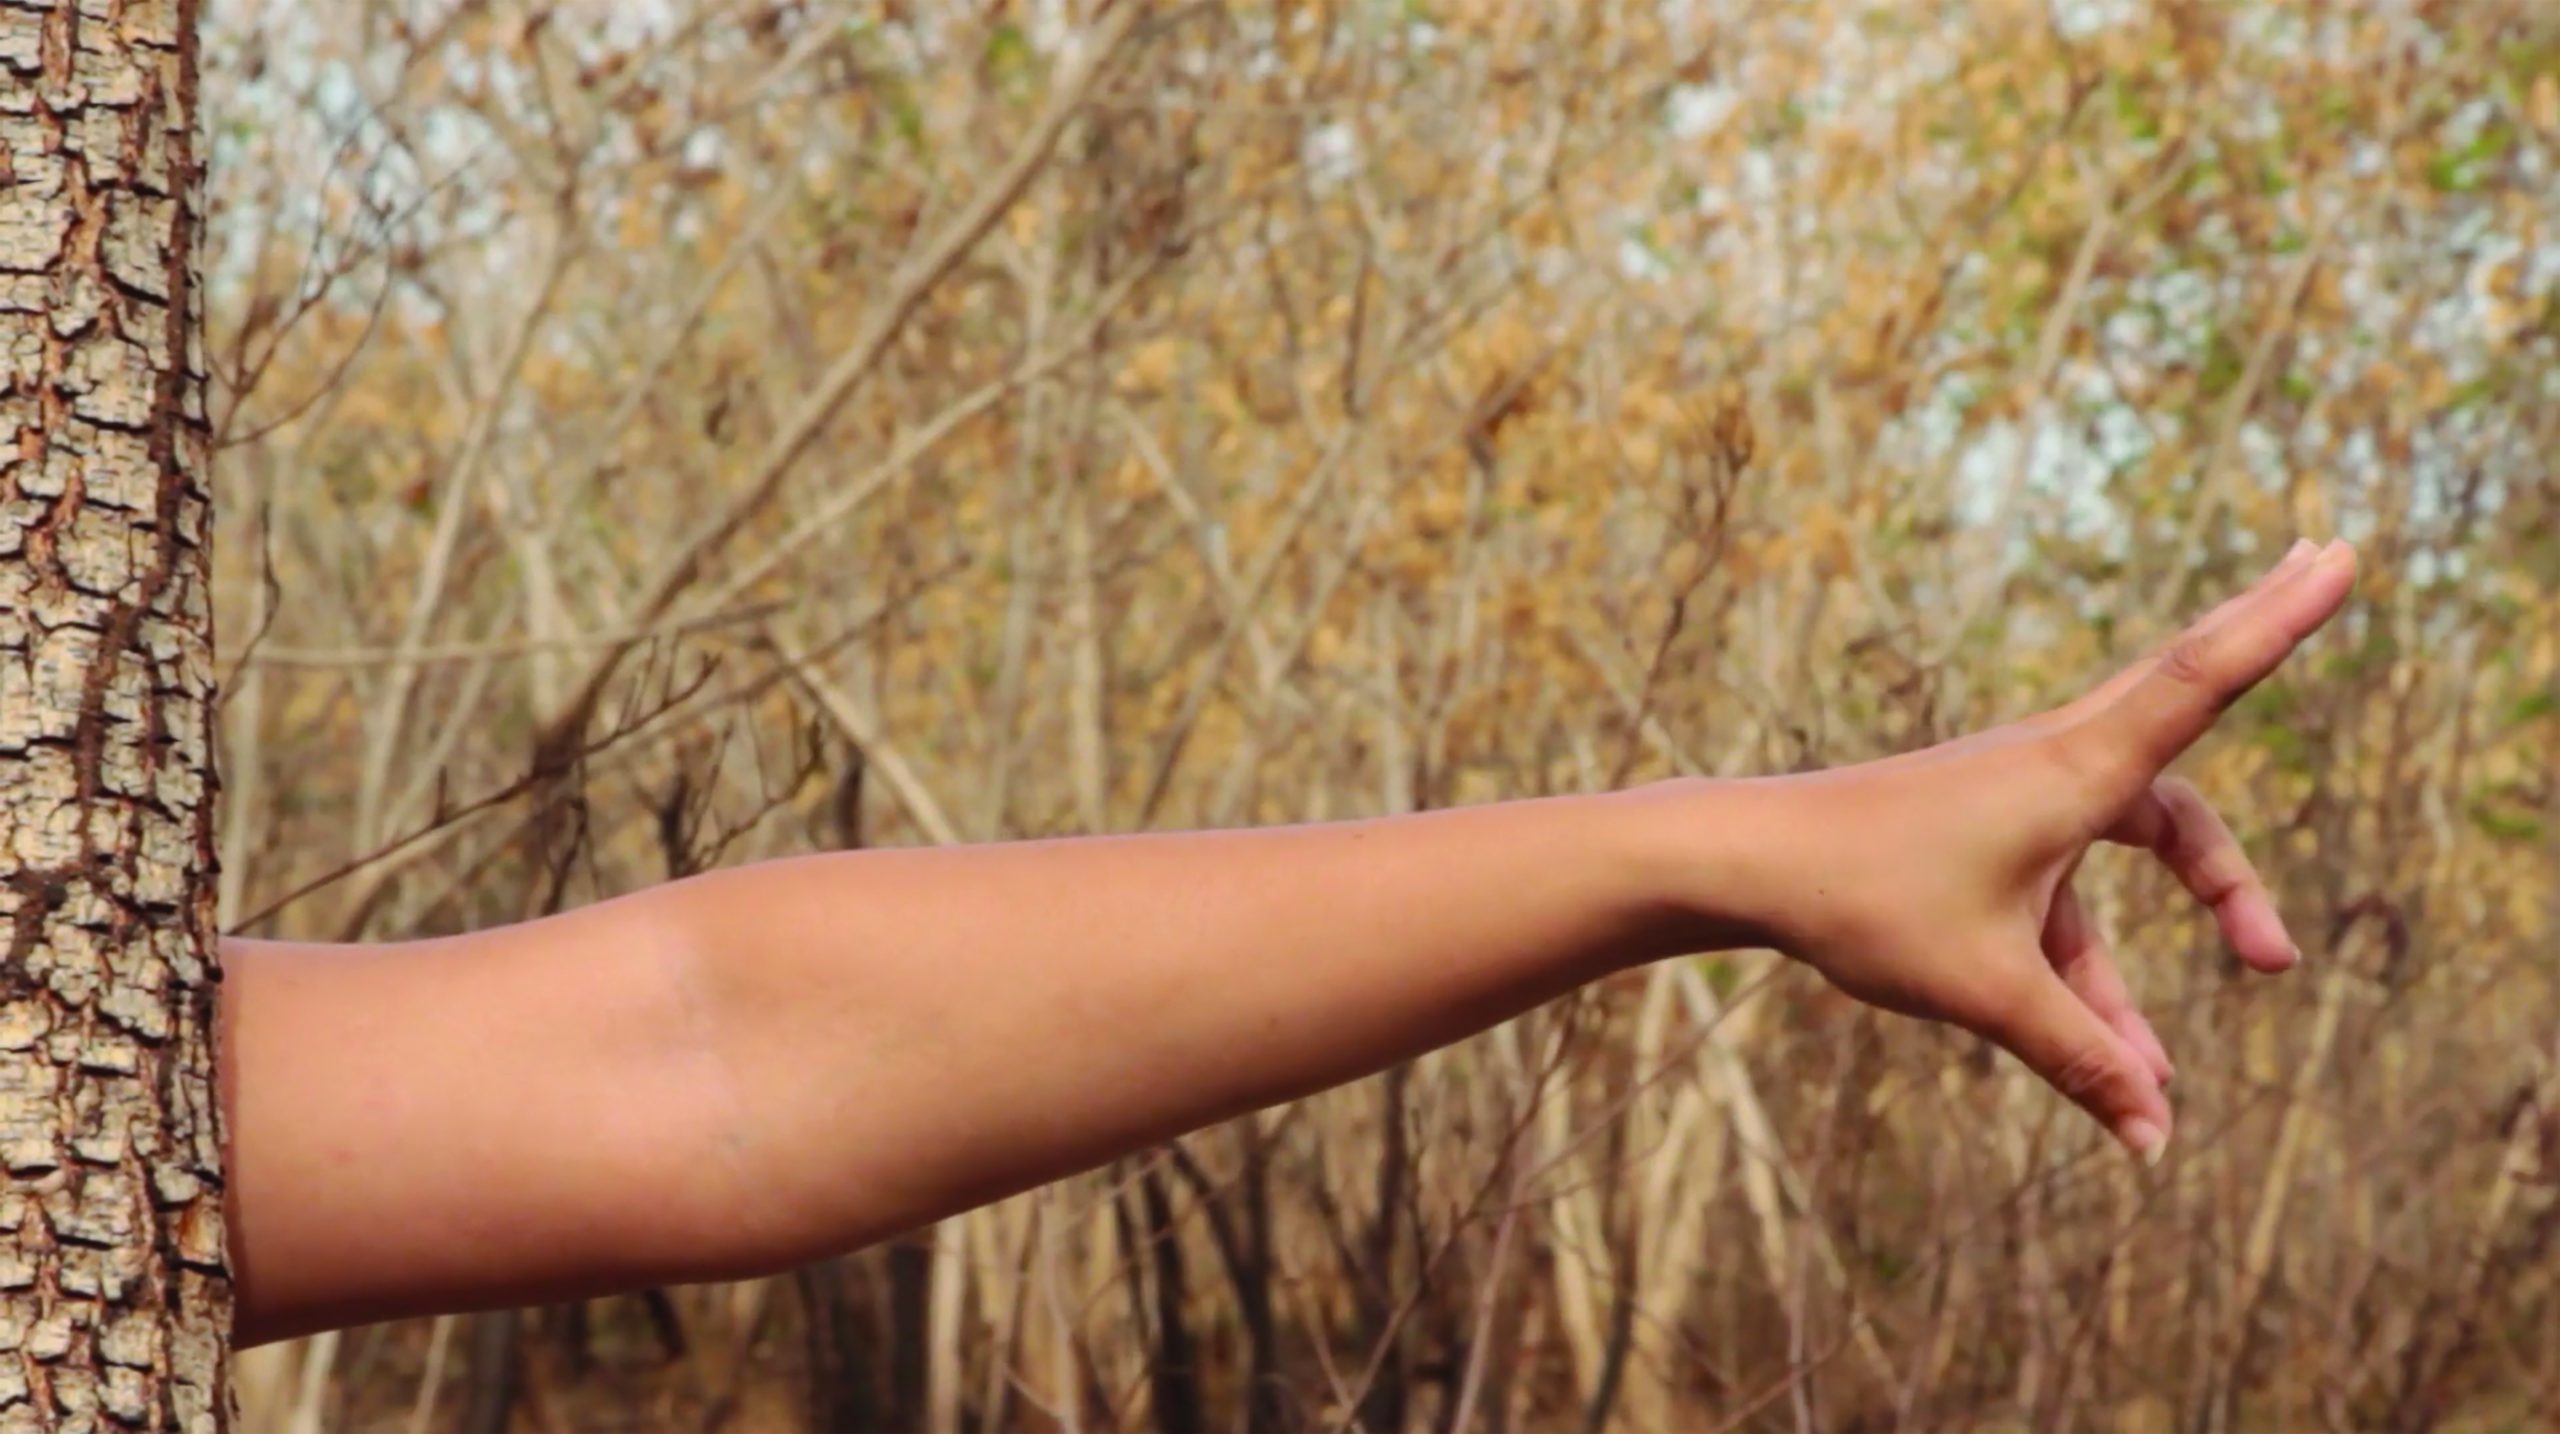 Image is a still from the film RESET by Alberta Whittle. It is of a brown arm reaching out behind a tree trunk with a field of wheat in the background.